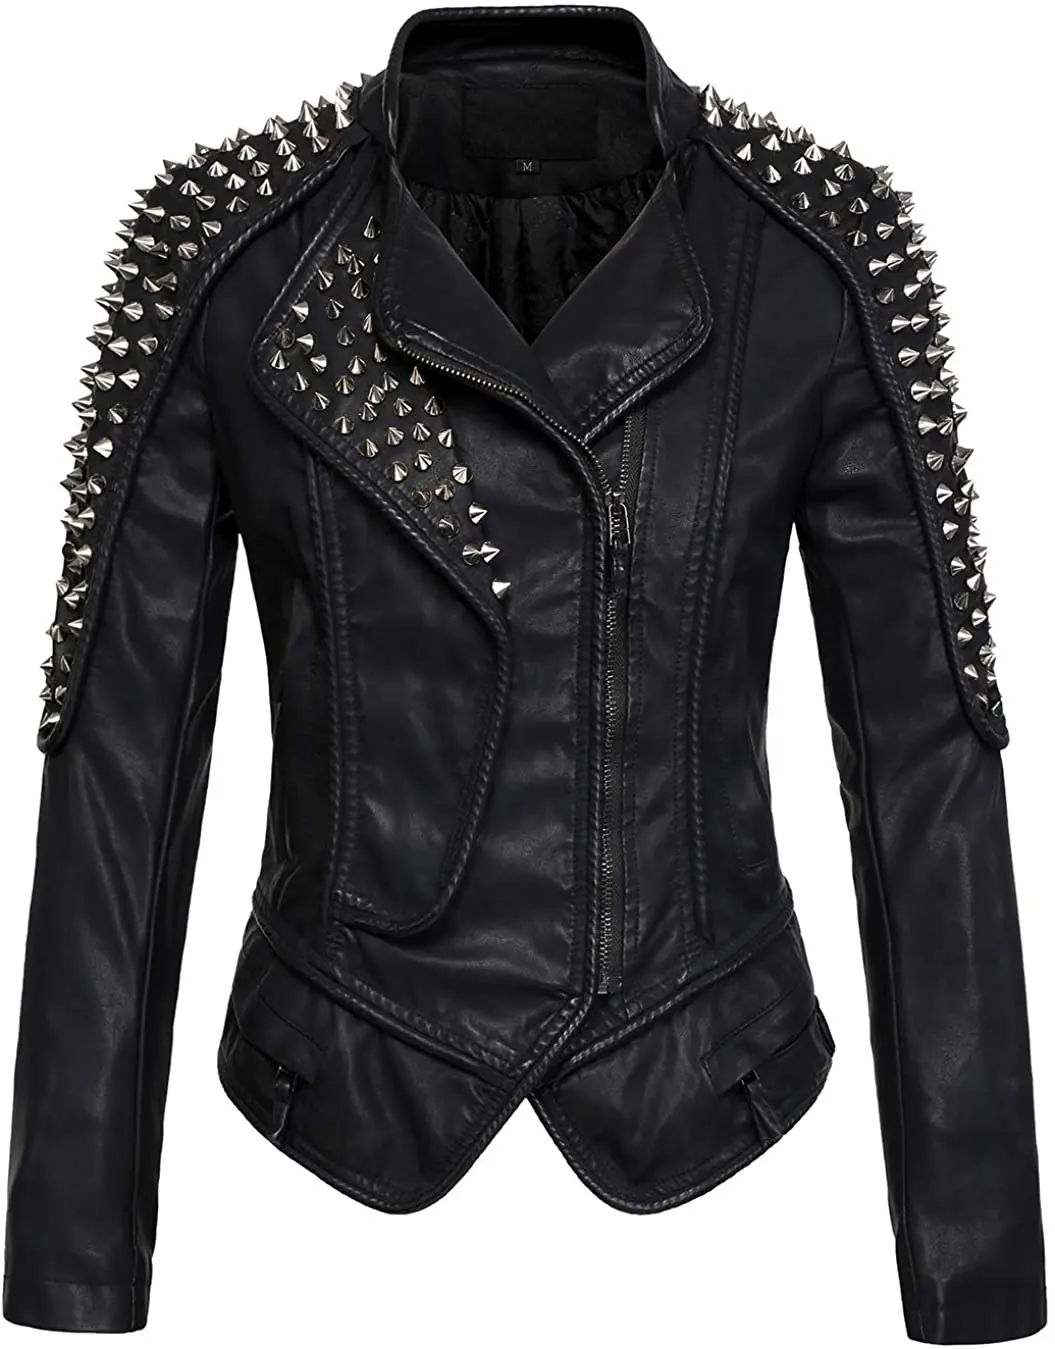 Women Black Leather Stylish Jackets with Studded On Shoulders & Collar High-Quality Material 100% Real Sheepskin Leather Jackets